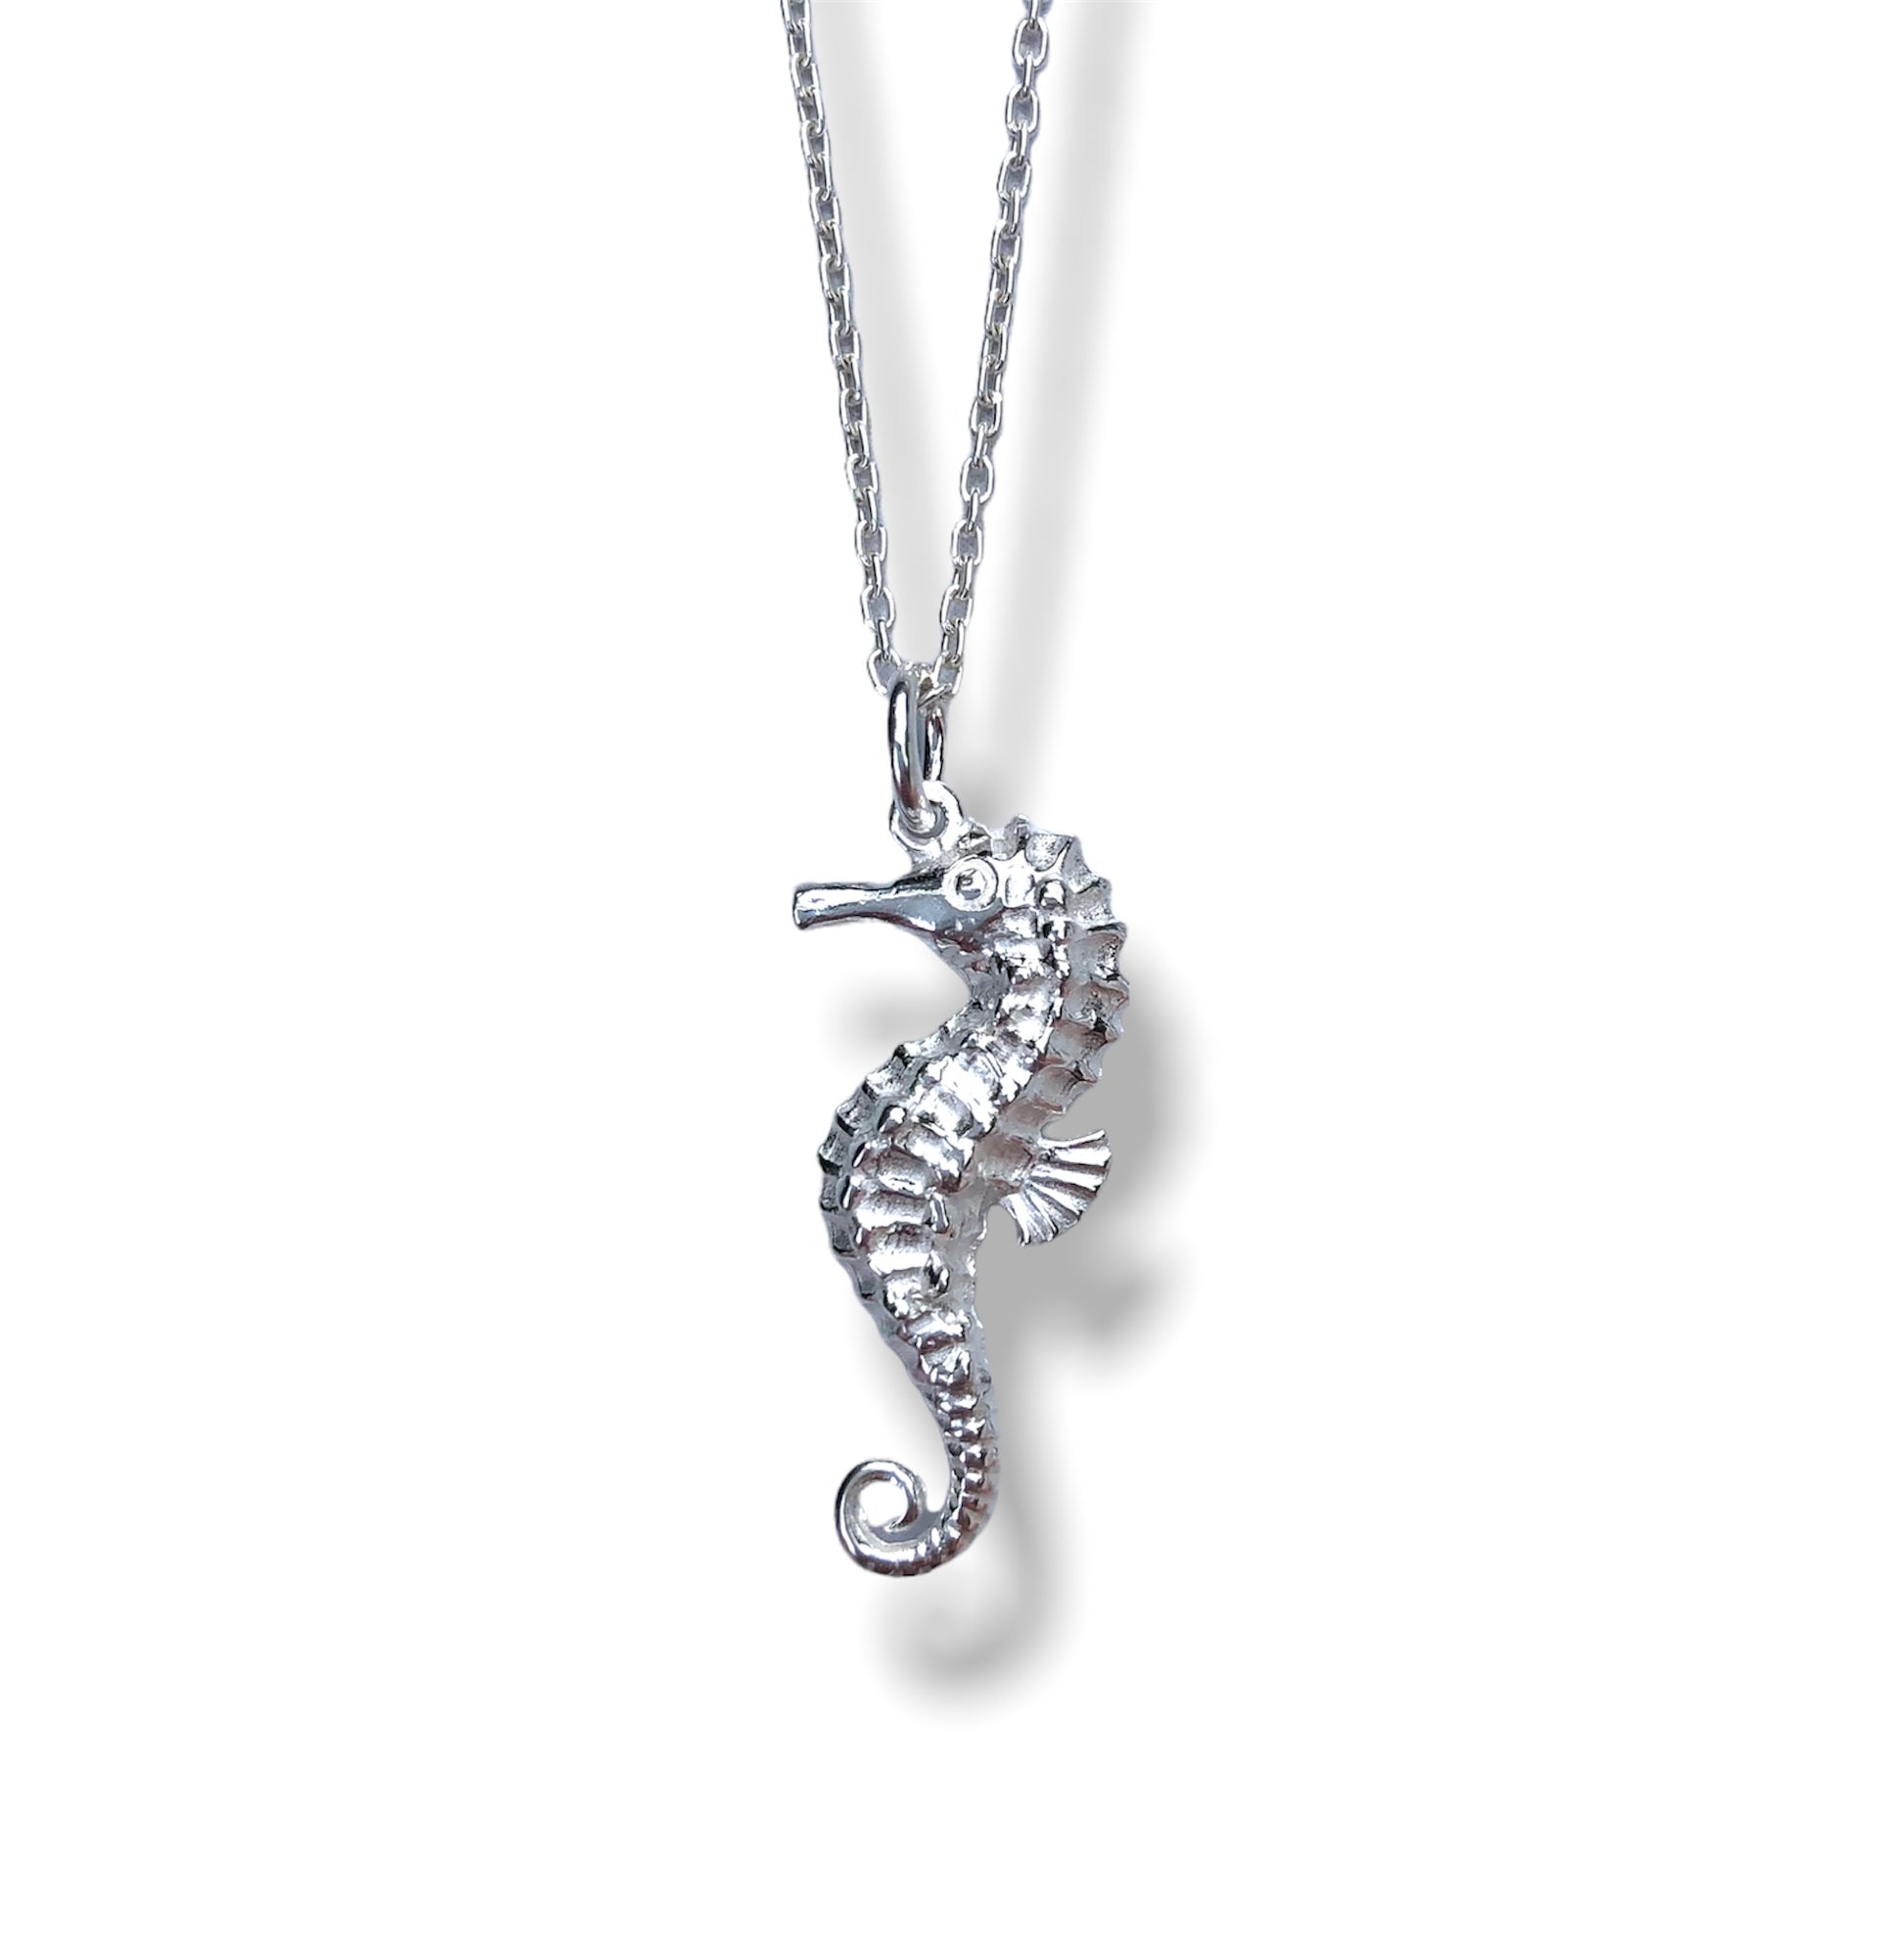 Silver seahorse pendant - romantic jewellery gifts for her